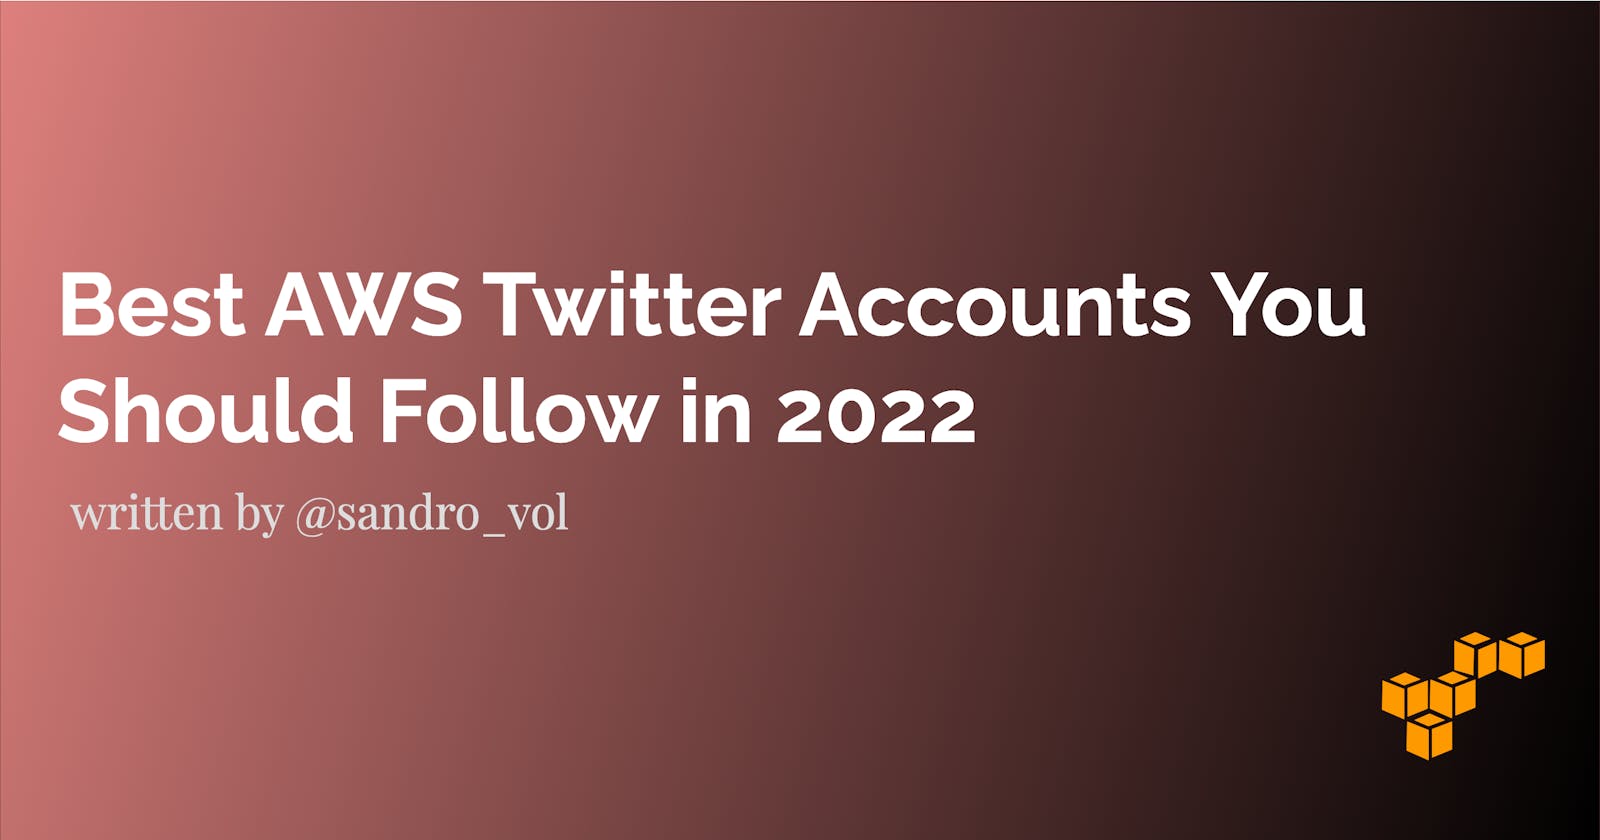 Best AWS Twitter Accounts You Should Follow in 2022